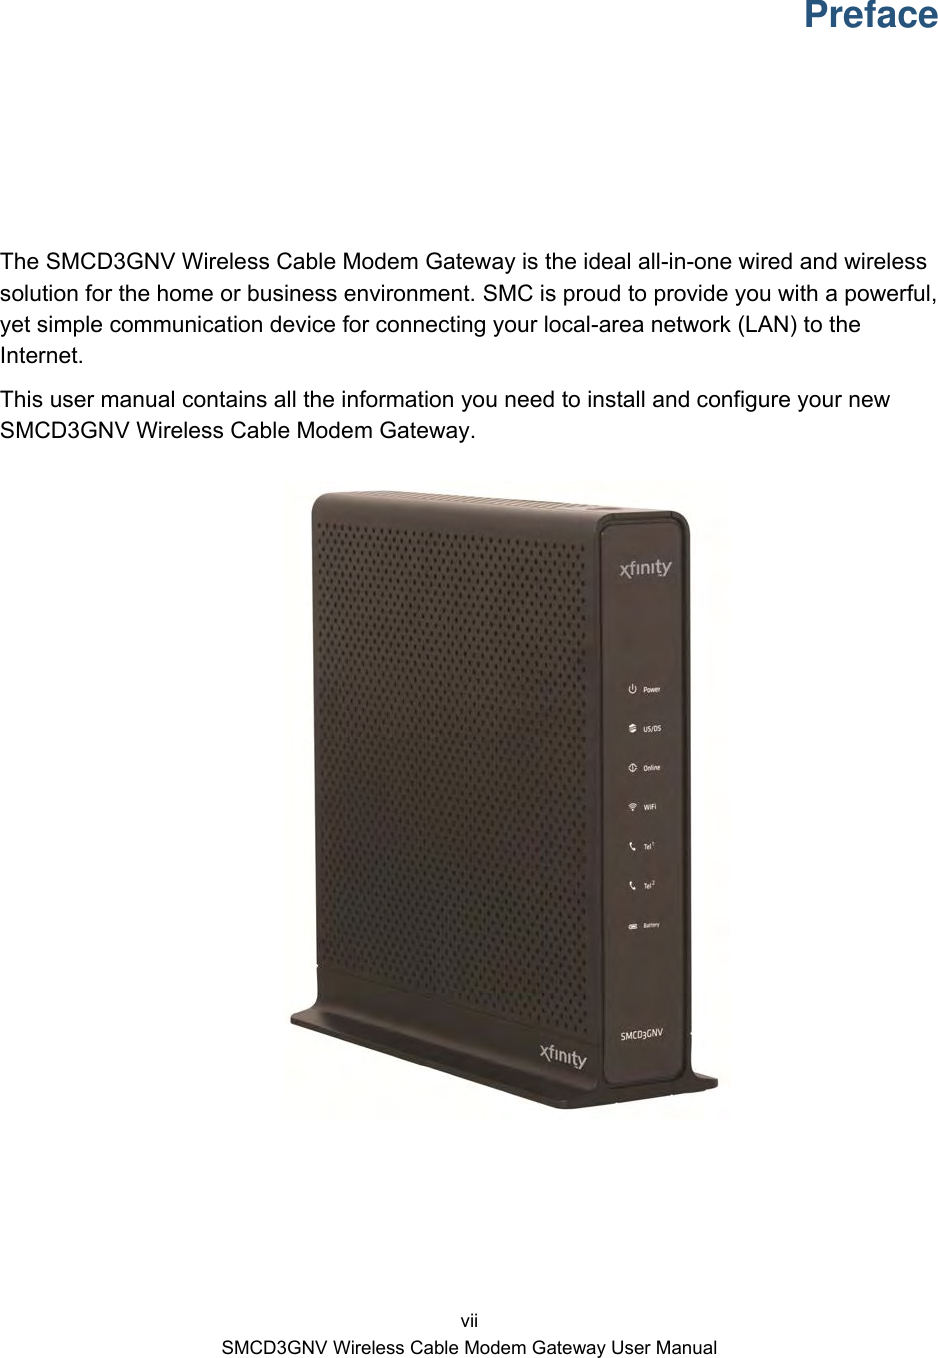  vii SMCD3GNV Wireless Cable Modem Gateway User Manual Preface The SMCD3GNV Wireless Cable Modem Gateway is the ideal all-in-one wired and wireless solution for the home or business environment. SMC is proud to provide you with a powerful, yet simple communication device for connecting your local-area network (LAN) to the Internet. This user manual contains all the information you need to install and configure your new SMCD3GNV Wireless Cable Modem Gateway.     